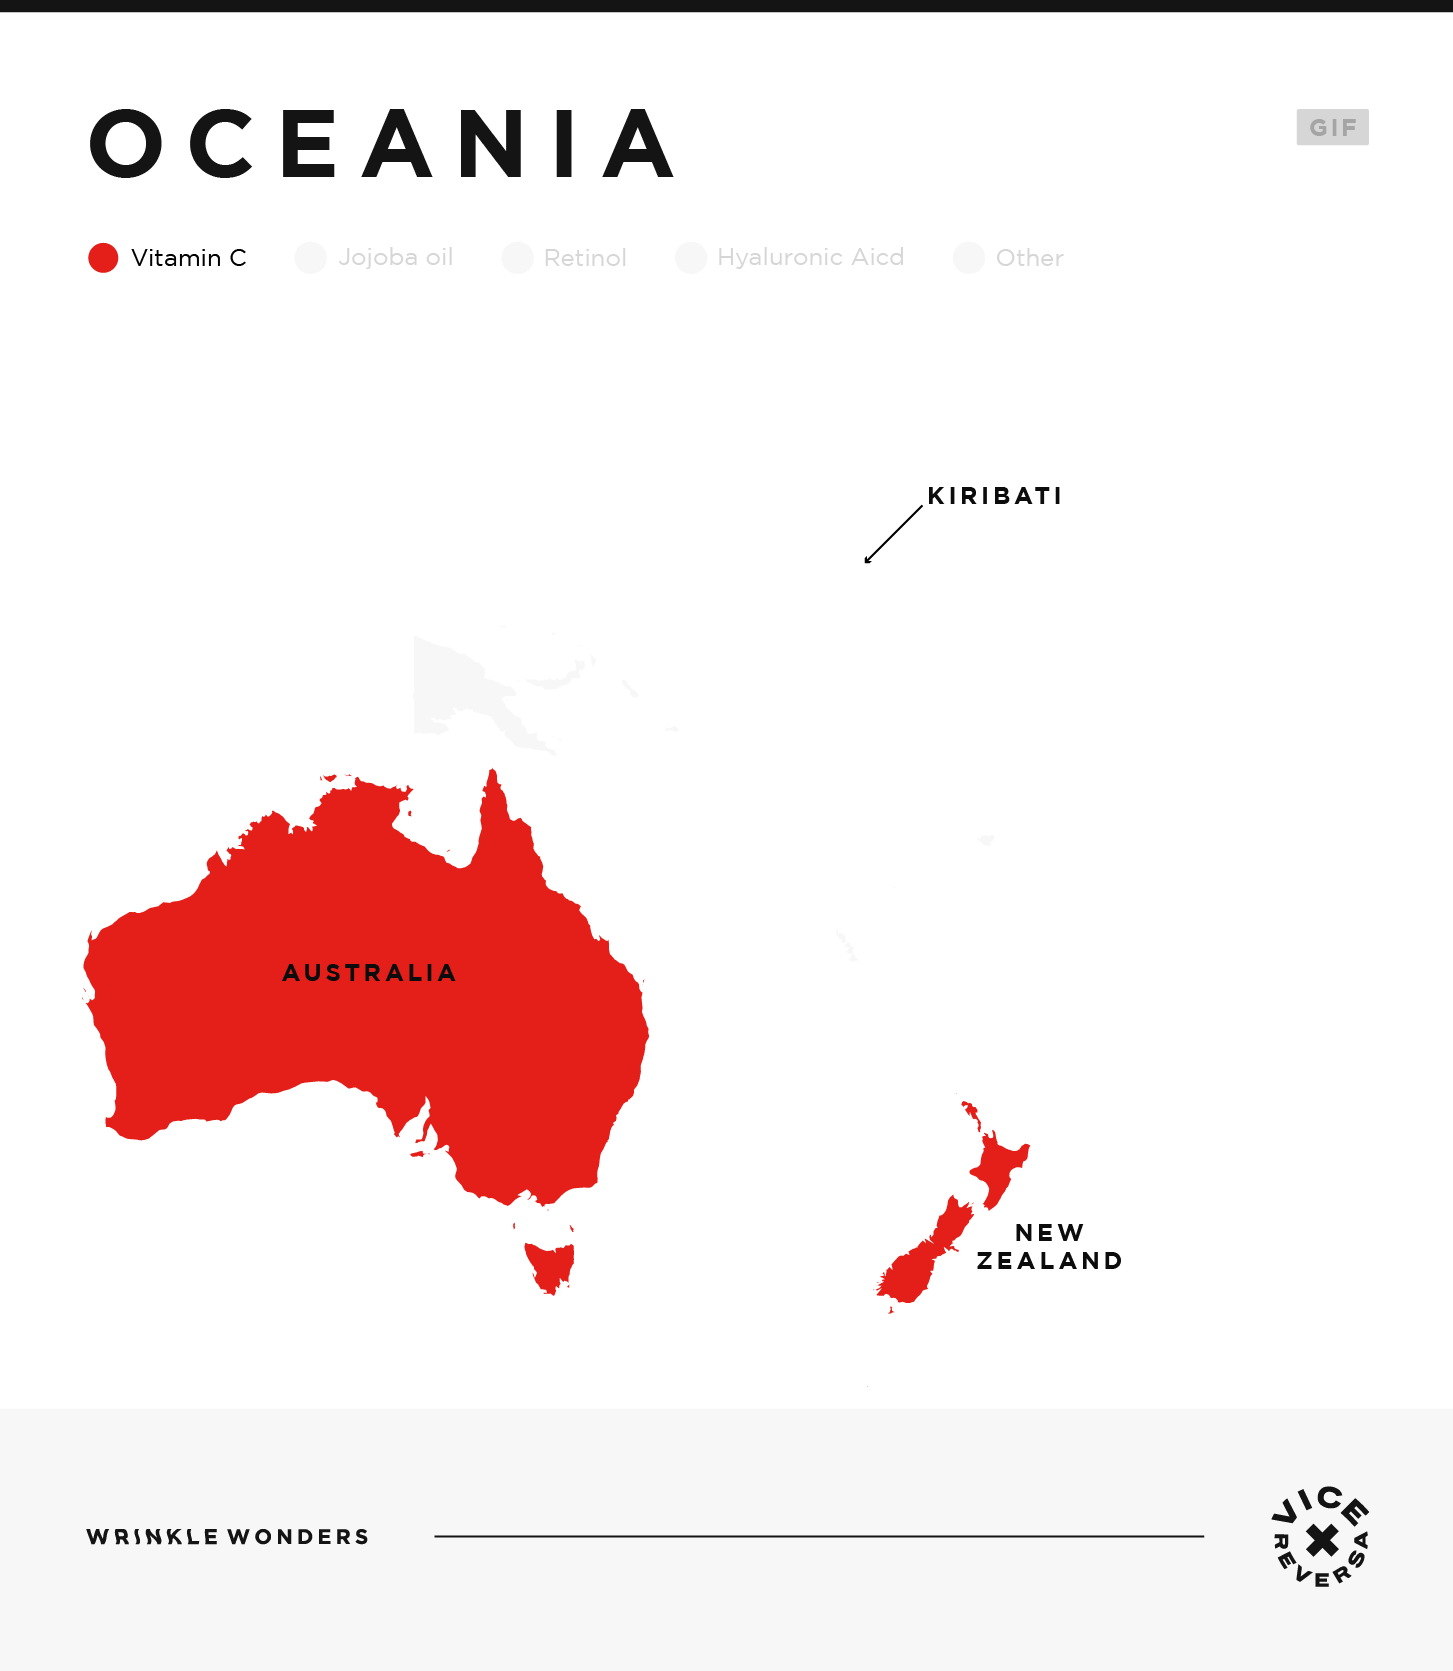 An interactive map showing the most searched for anti-wrinkle products in Oceania.